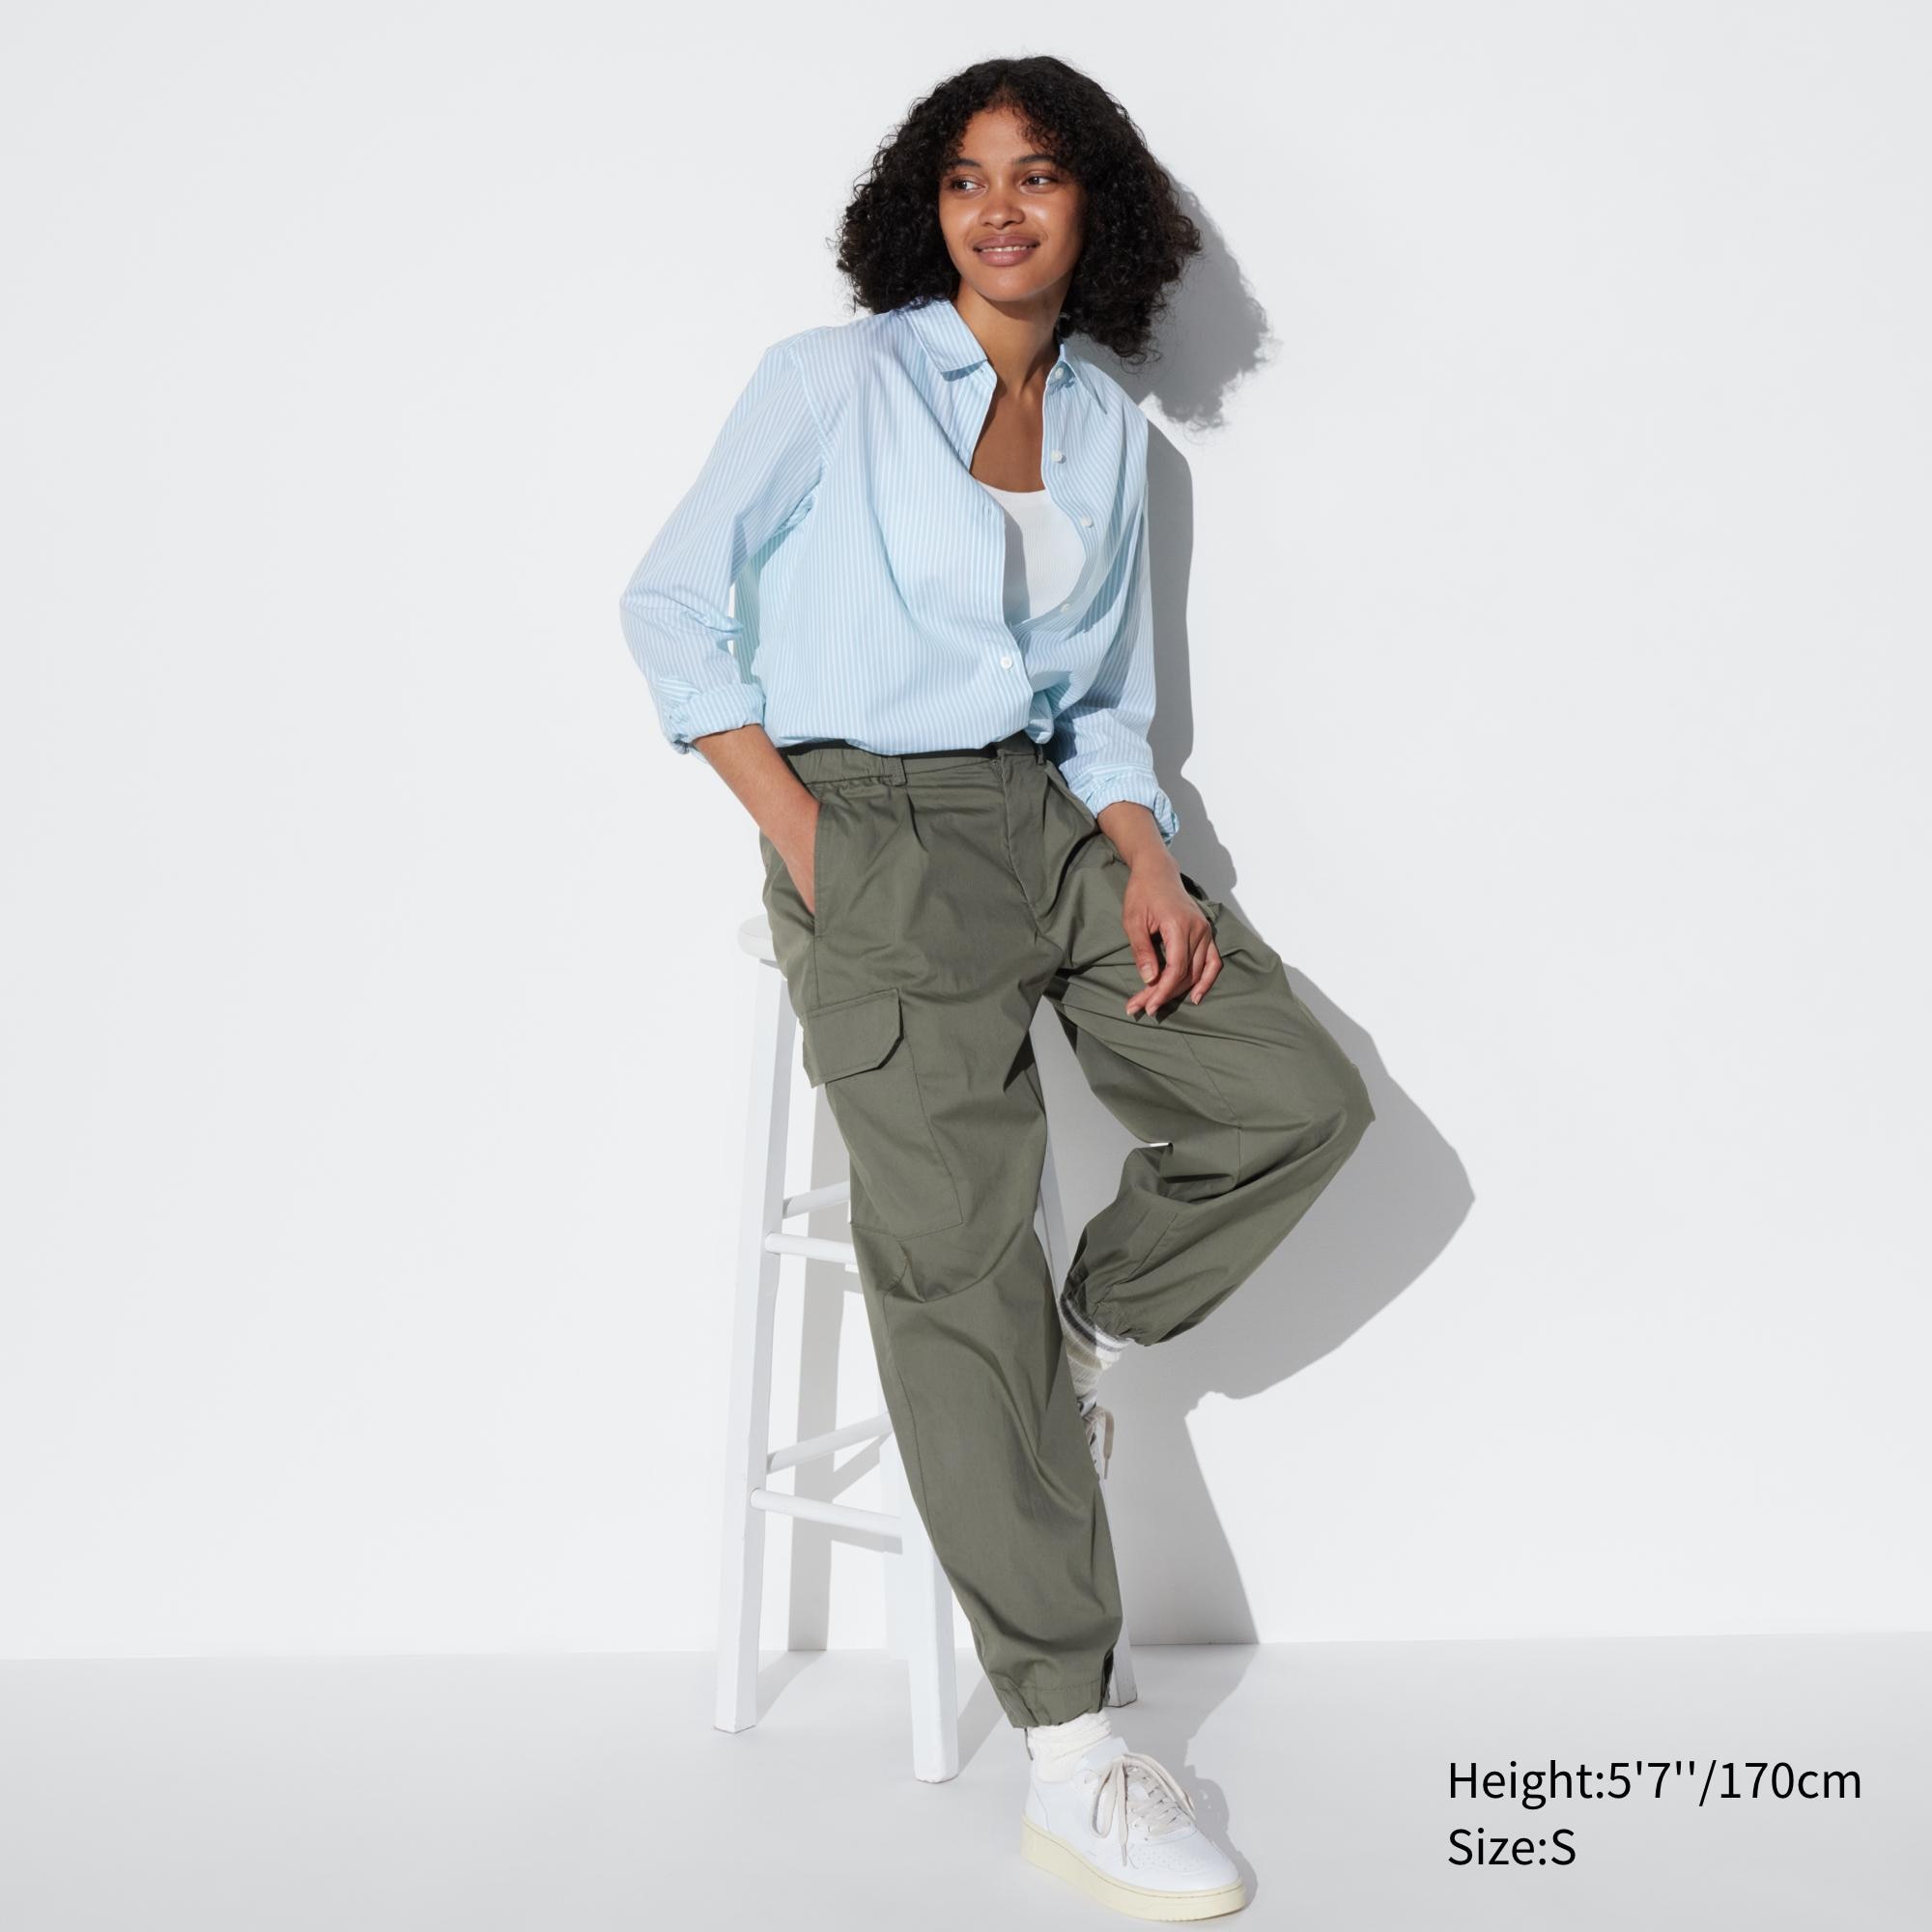 Buy Uniqlo Heattech Warm Easy Pants Cargo Leg Length 72 78cm at affordable  prices — free shipping, real reviews with photos — Joom